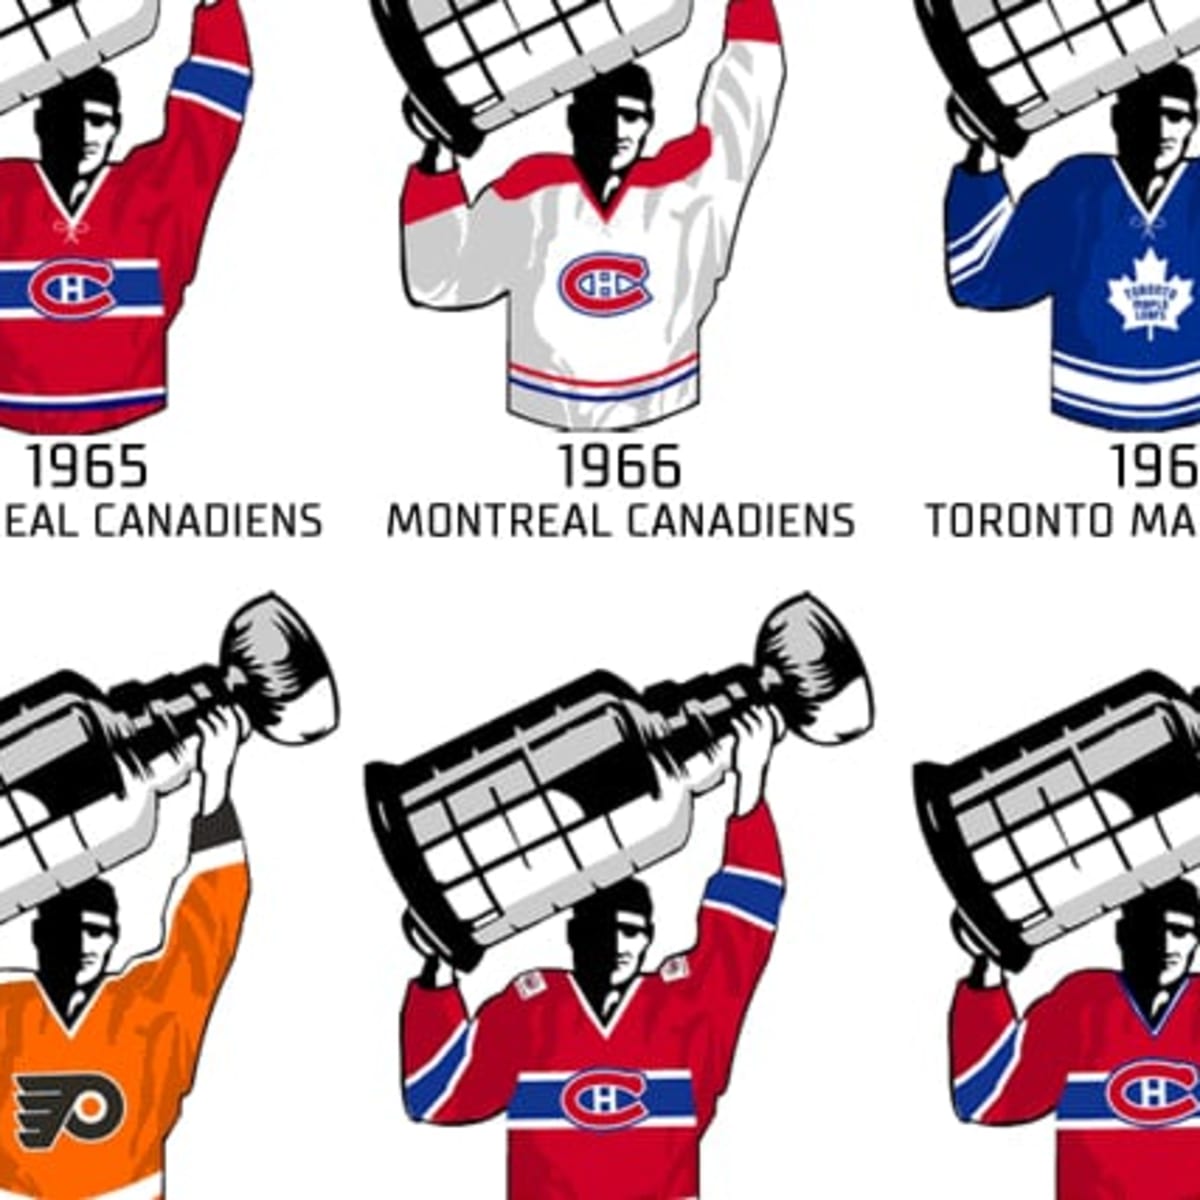 Stanley Cup has incredible history